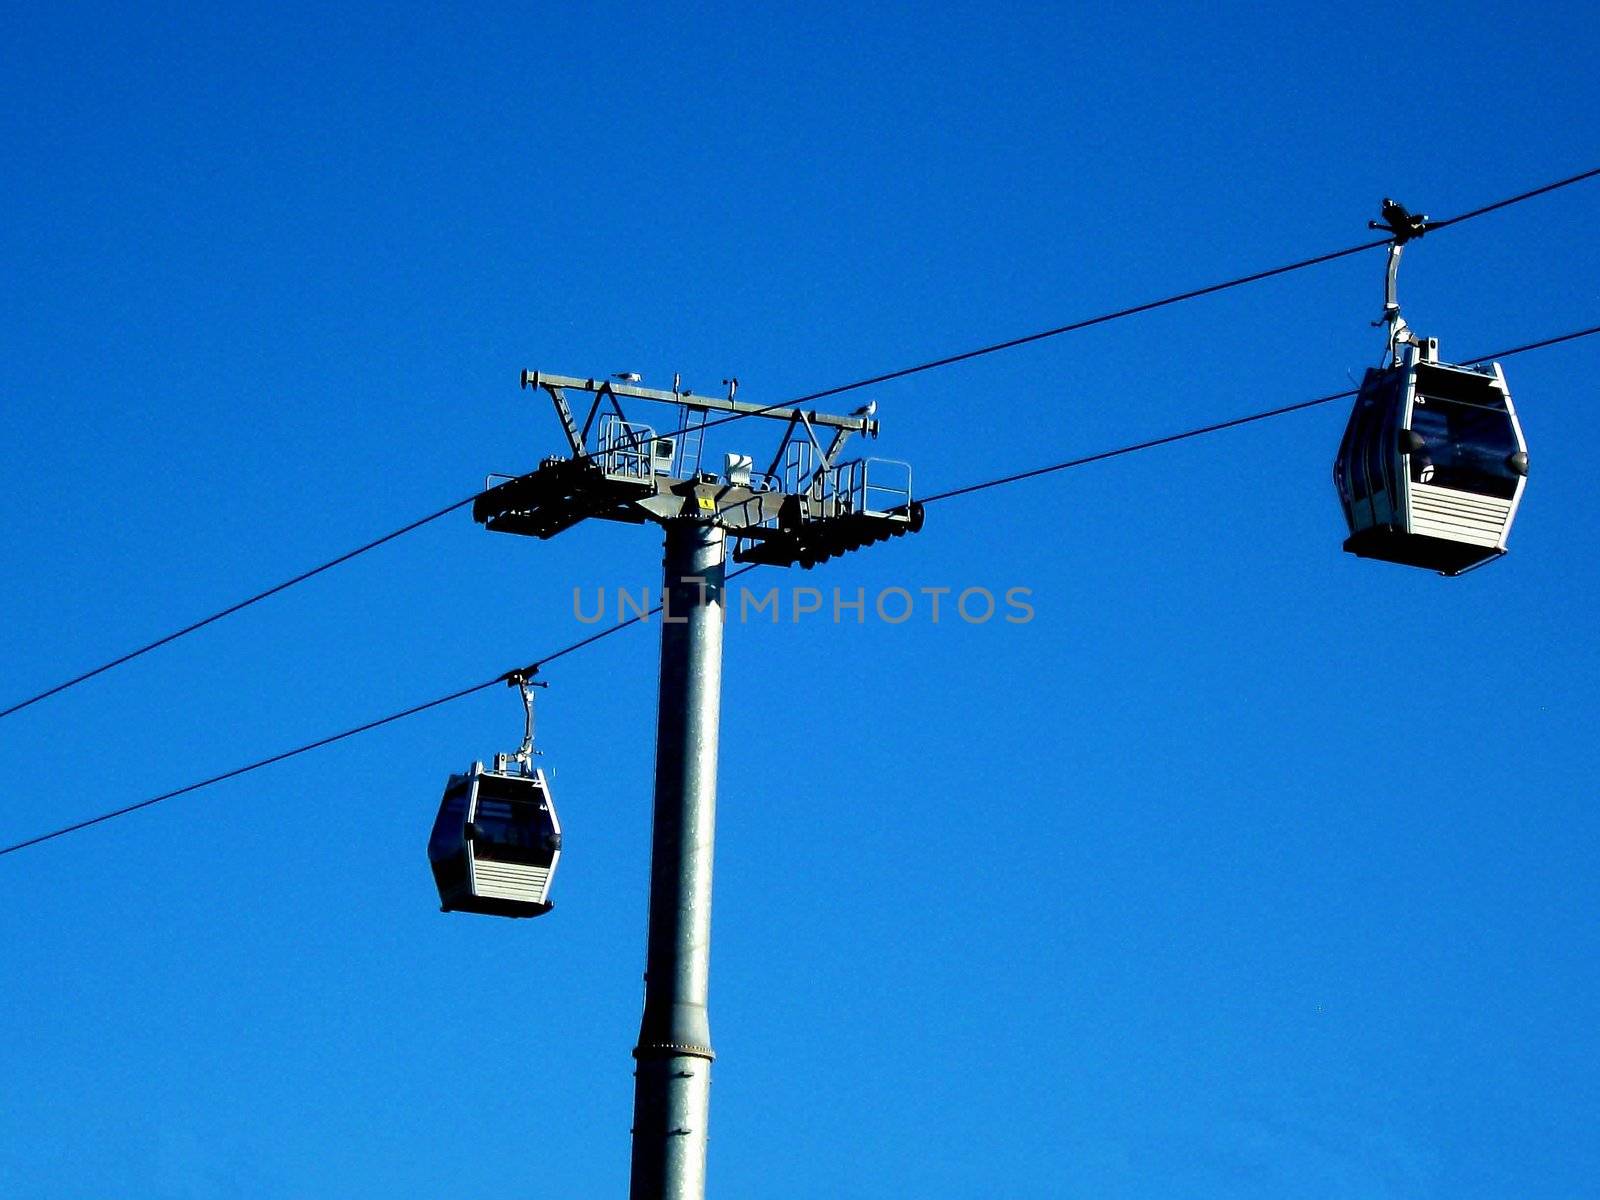 Gondolas ascending a mountain on a chairlift